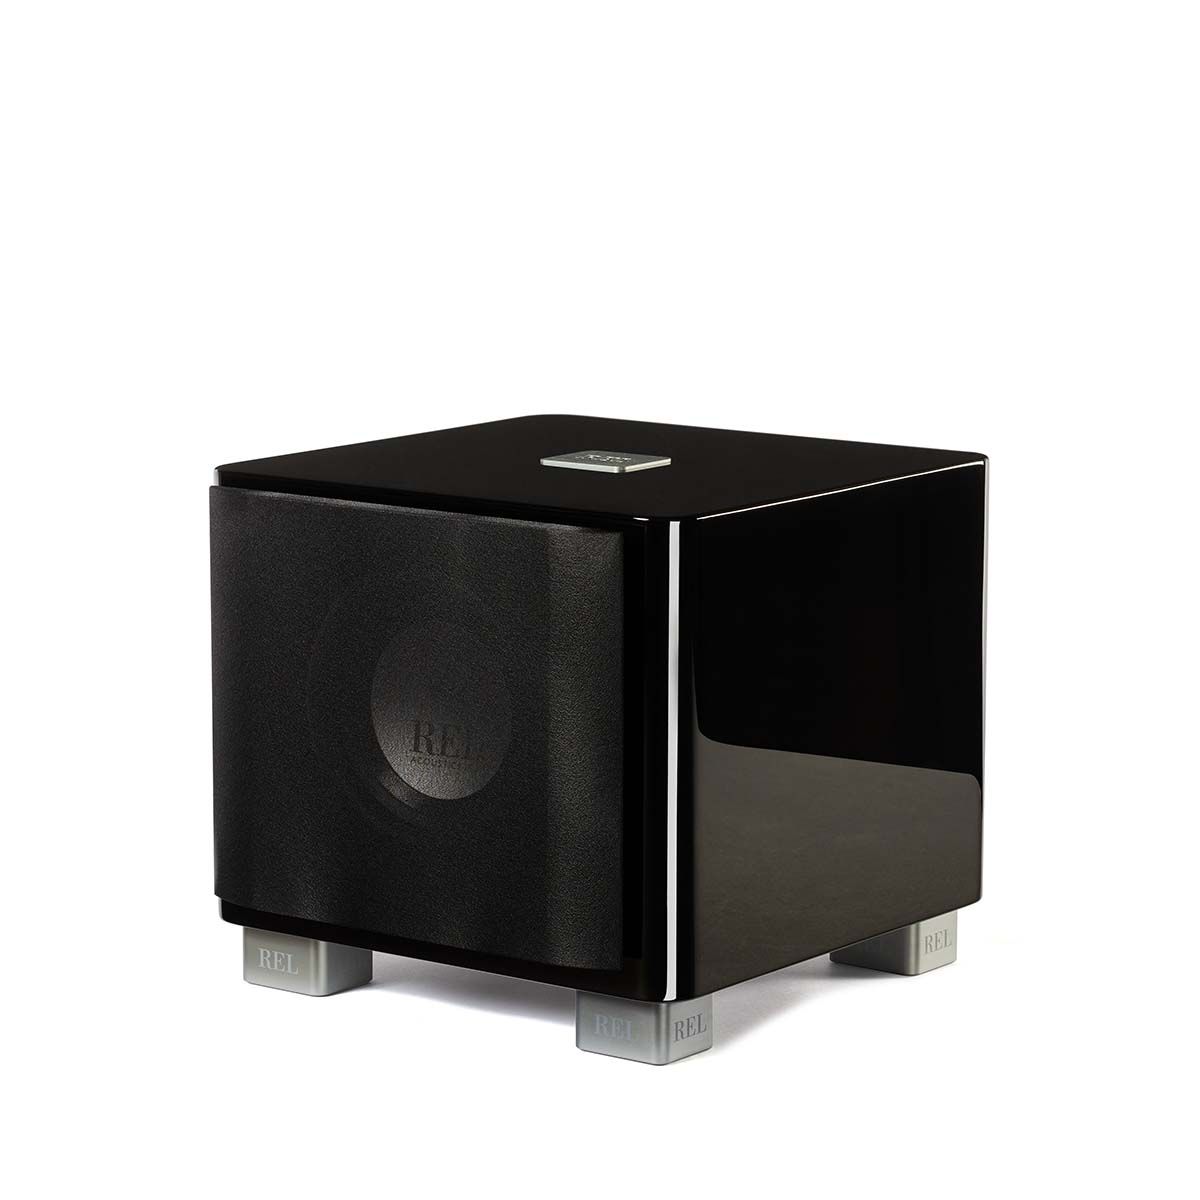 REL T/7x Subwoofer, black, front angle with grille